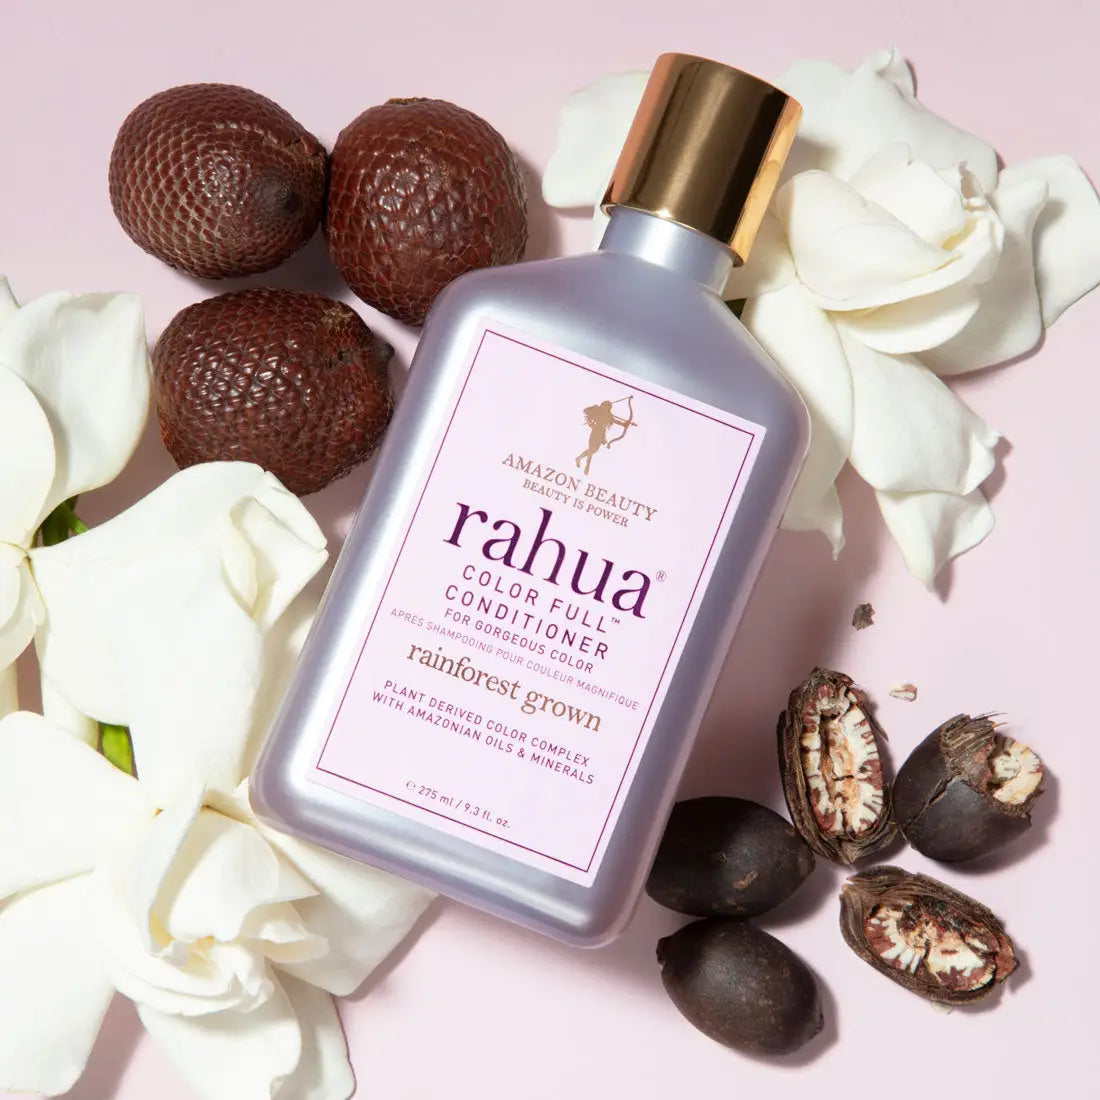 Rahua Color Full Conditioner 275ml - Free Shipping Worldwide